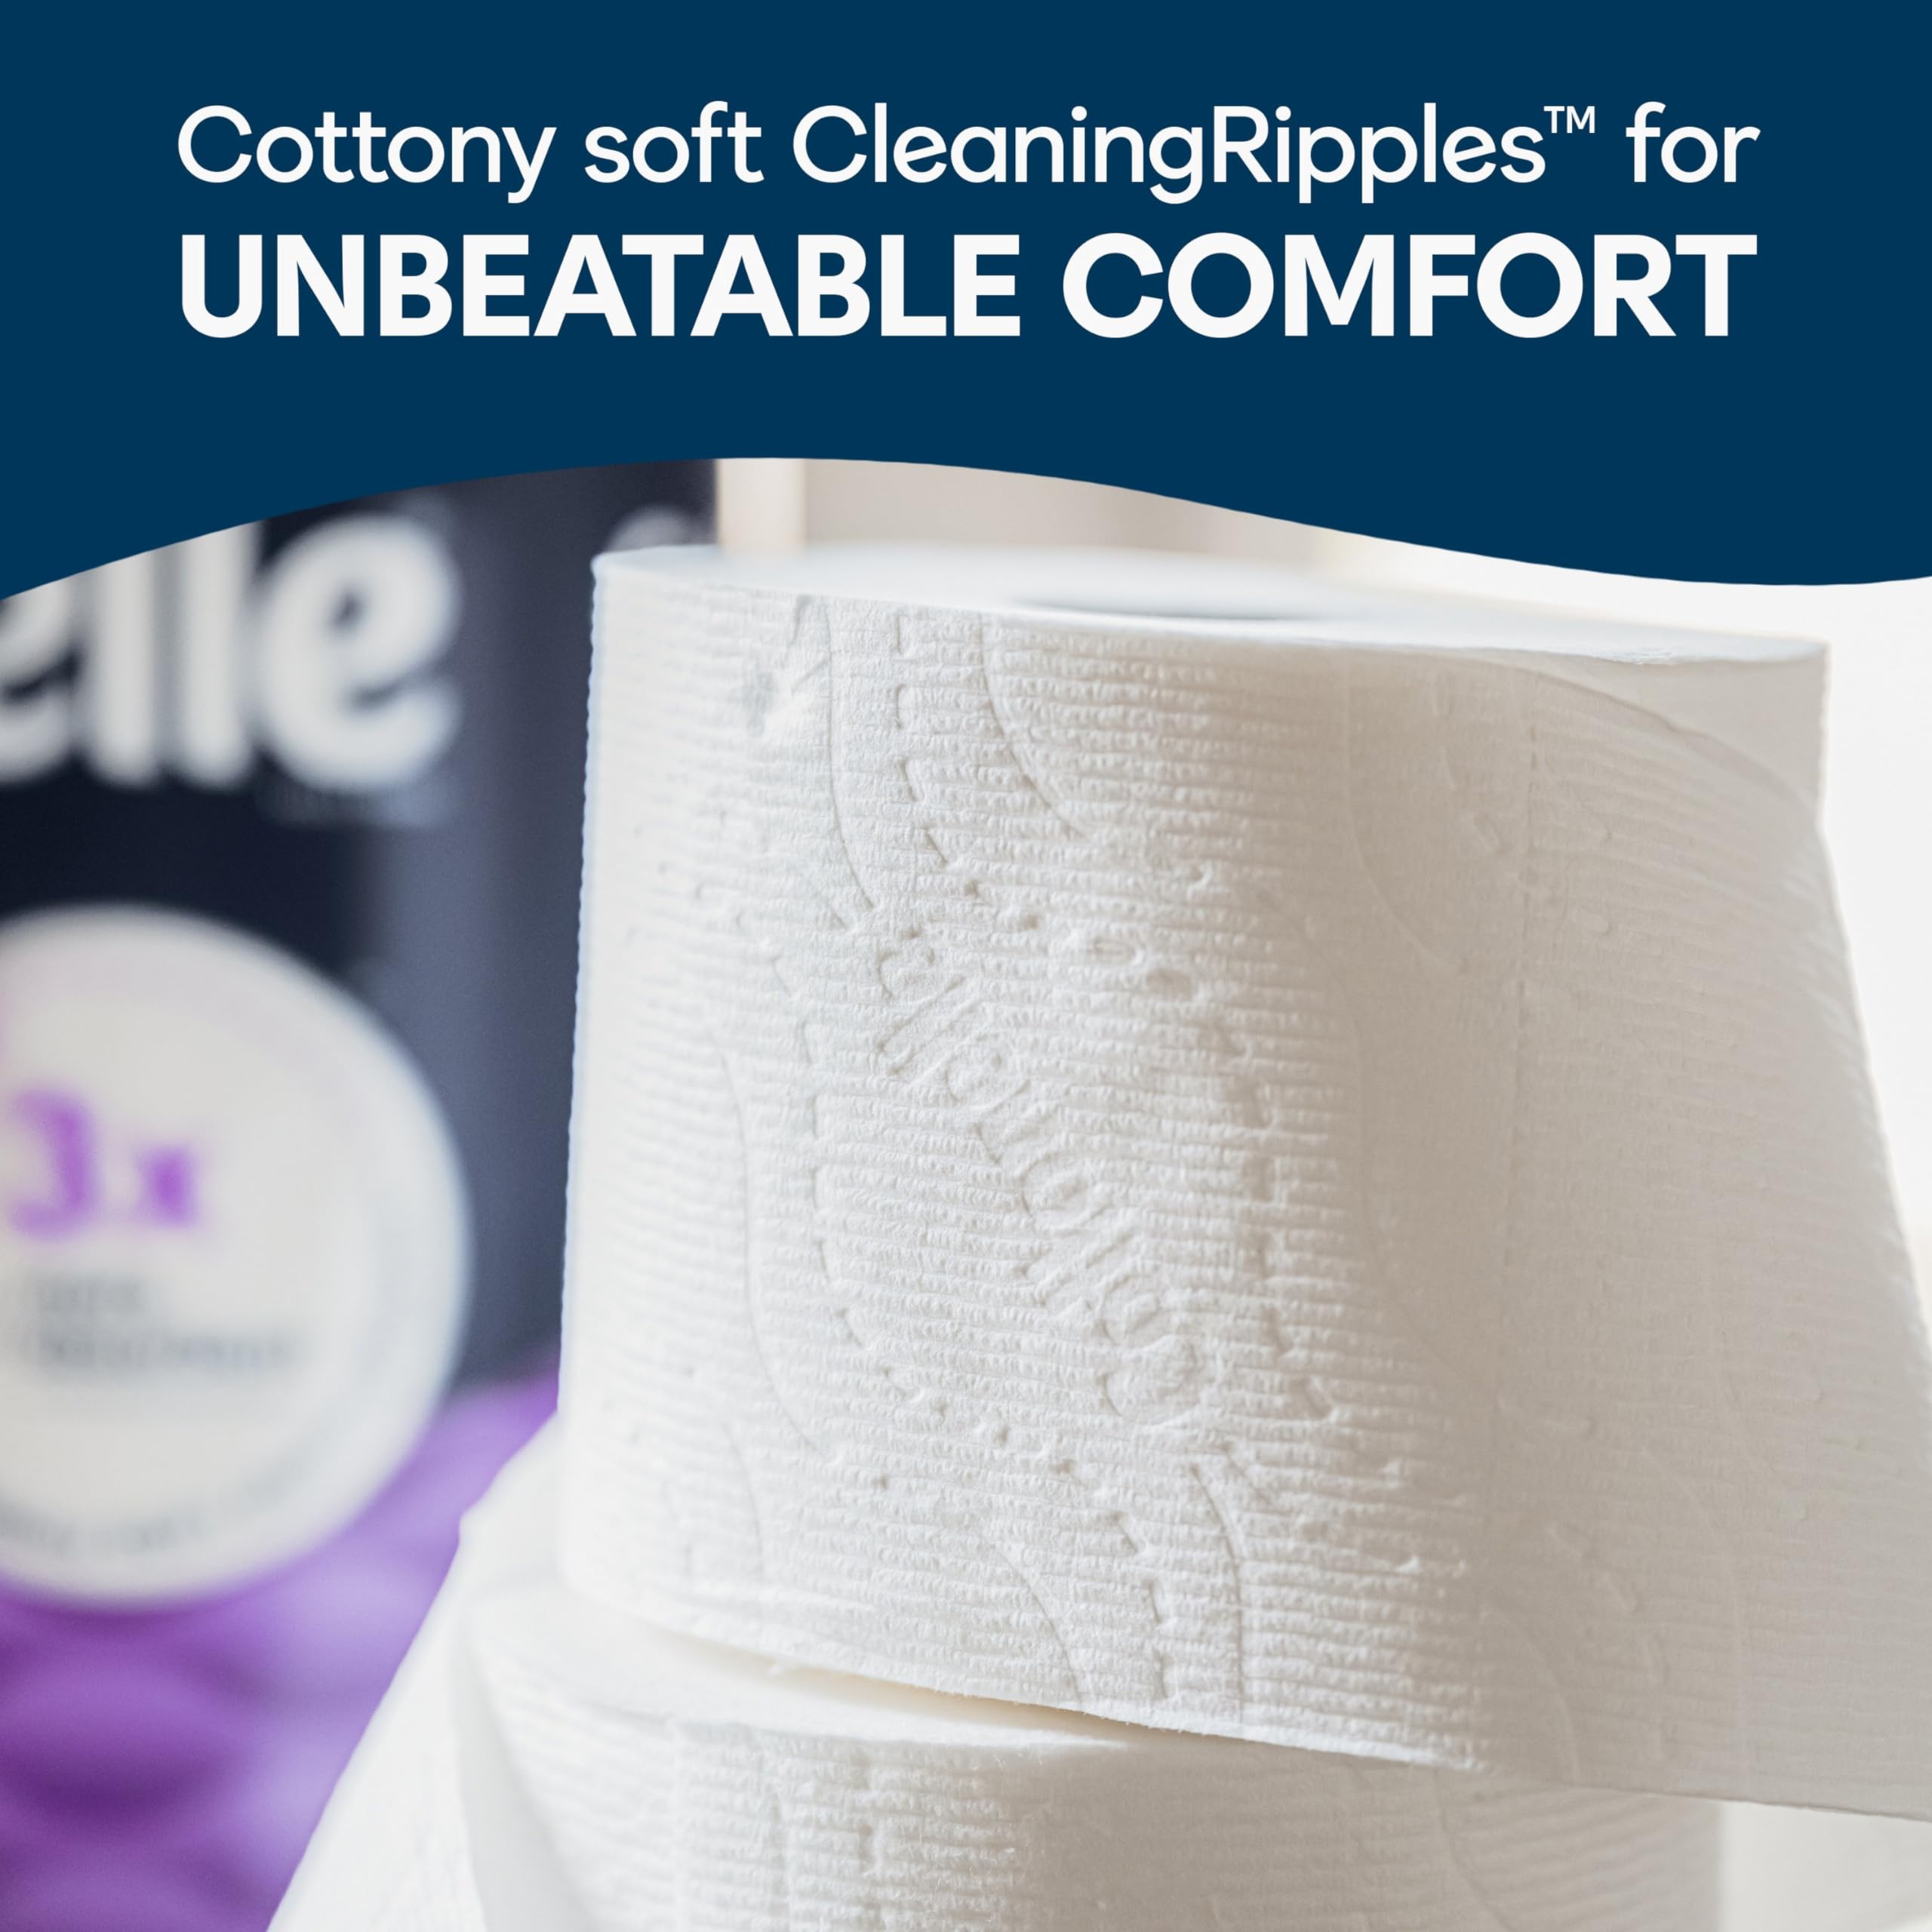 Cottonelle Ultra Comfort Toilet Paper with Cushiony CleaningRipples Texture, 24 Family Mega Rolls (24 Family Mega Rolls = 108 Regular Rolls) (4 Packs of 6), 296 Sheets per Roll, Packaging May Vary